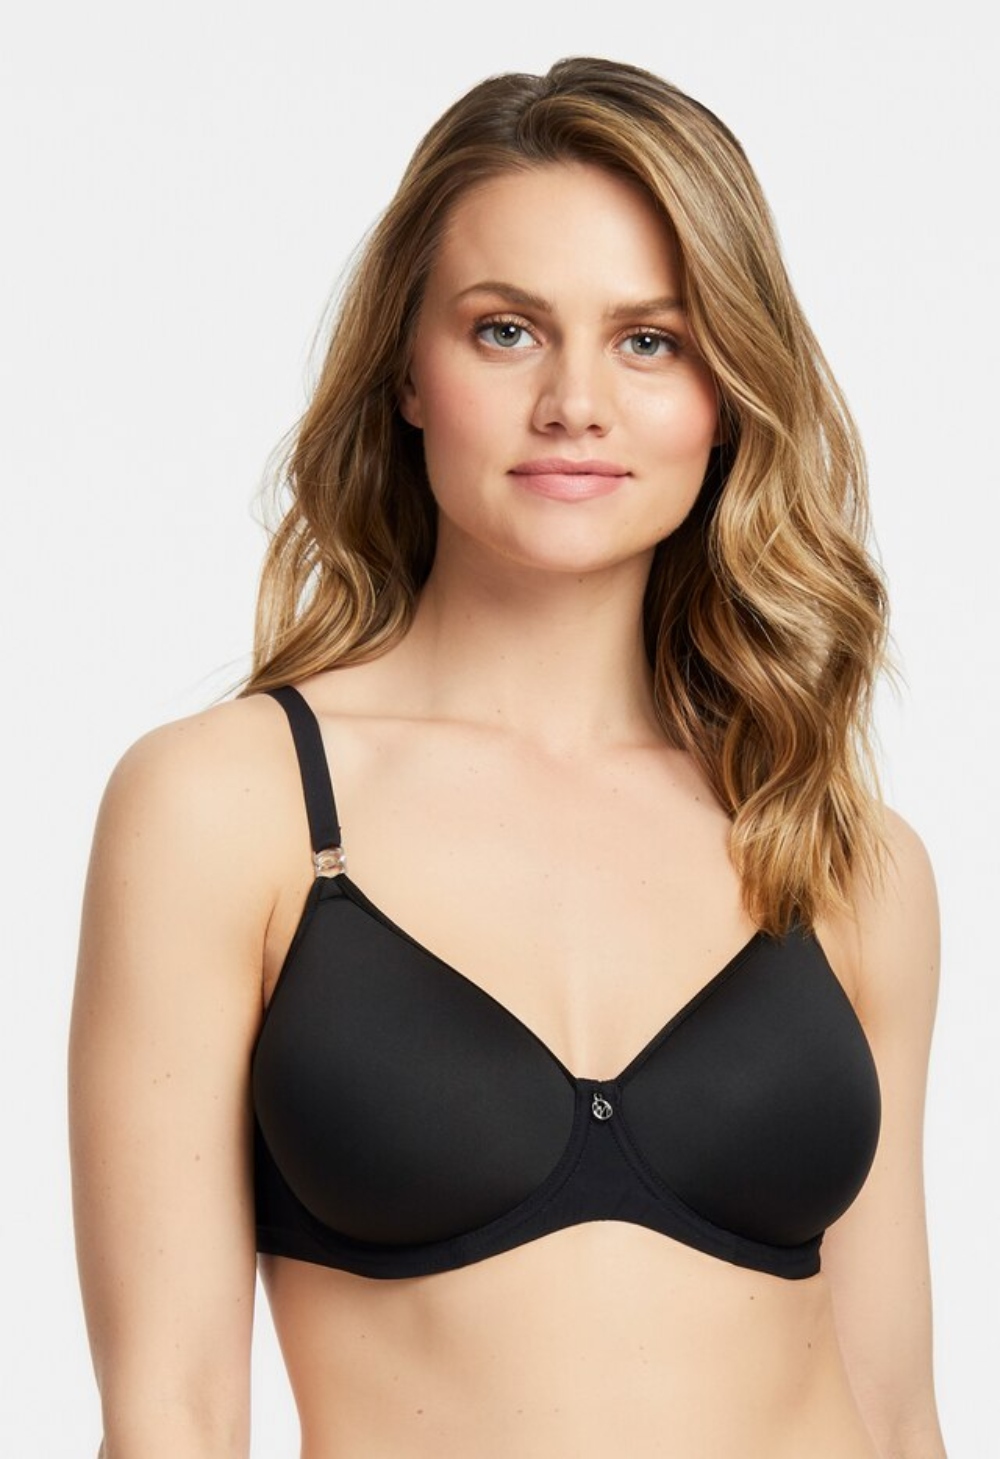 Let Us Build You A Lingerie Wardrobe From Scratch – Bra Doctor's Blog